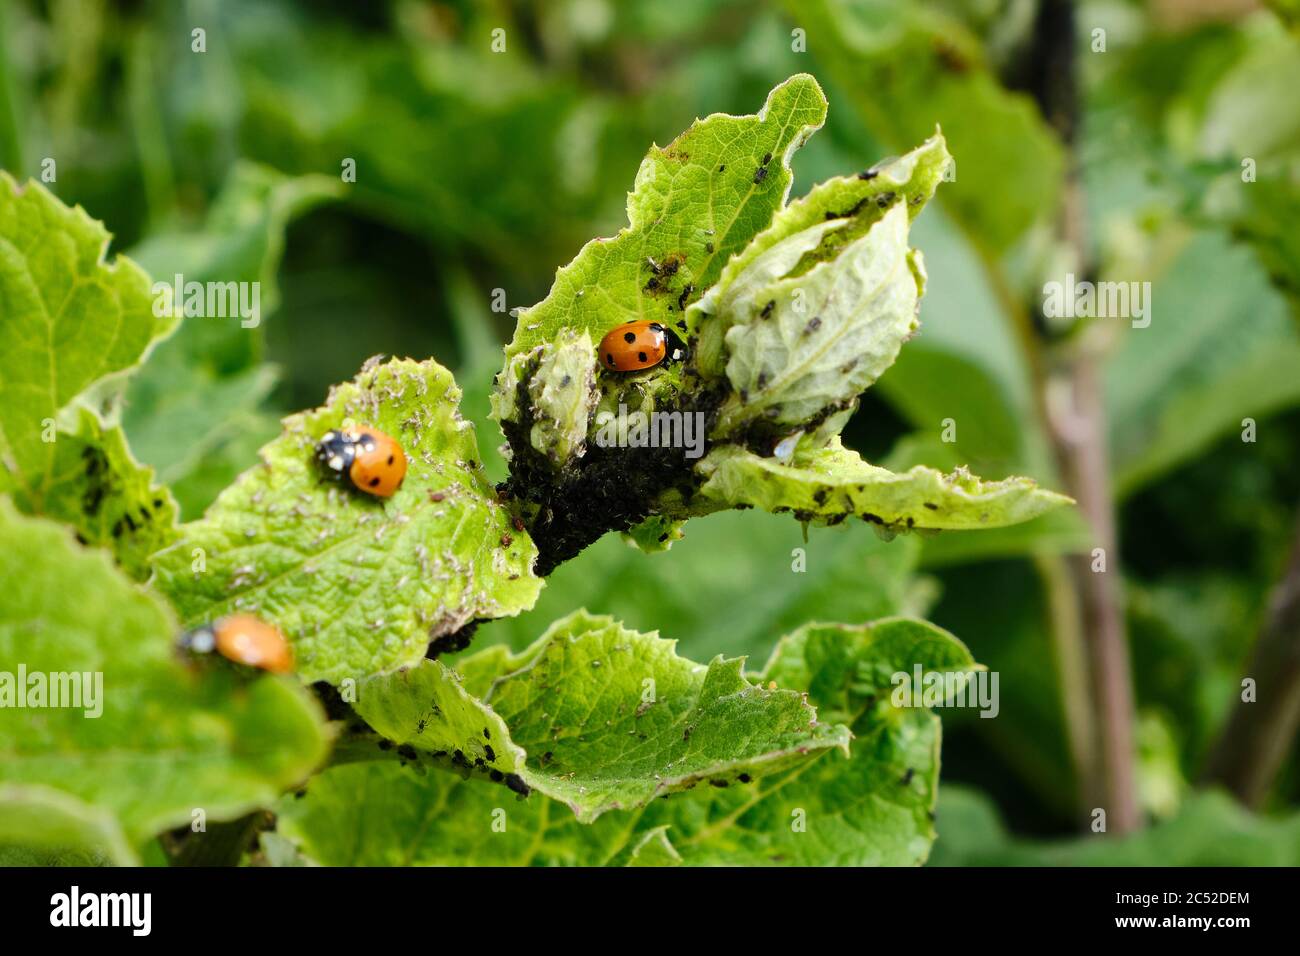 Seven spot ladybirds Coccinell septempunctata feeding on aphids on a burdock Asteraceae plant in June, biological pest control Stock Photo